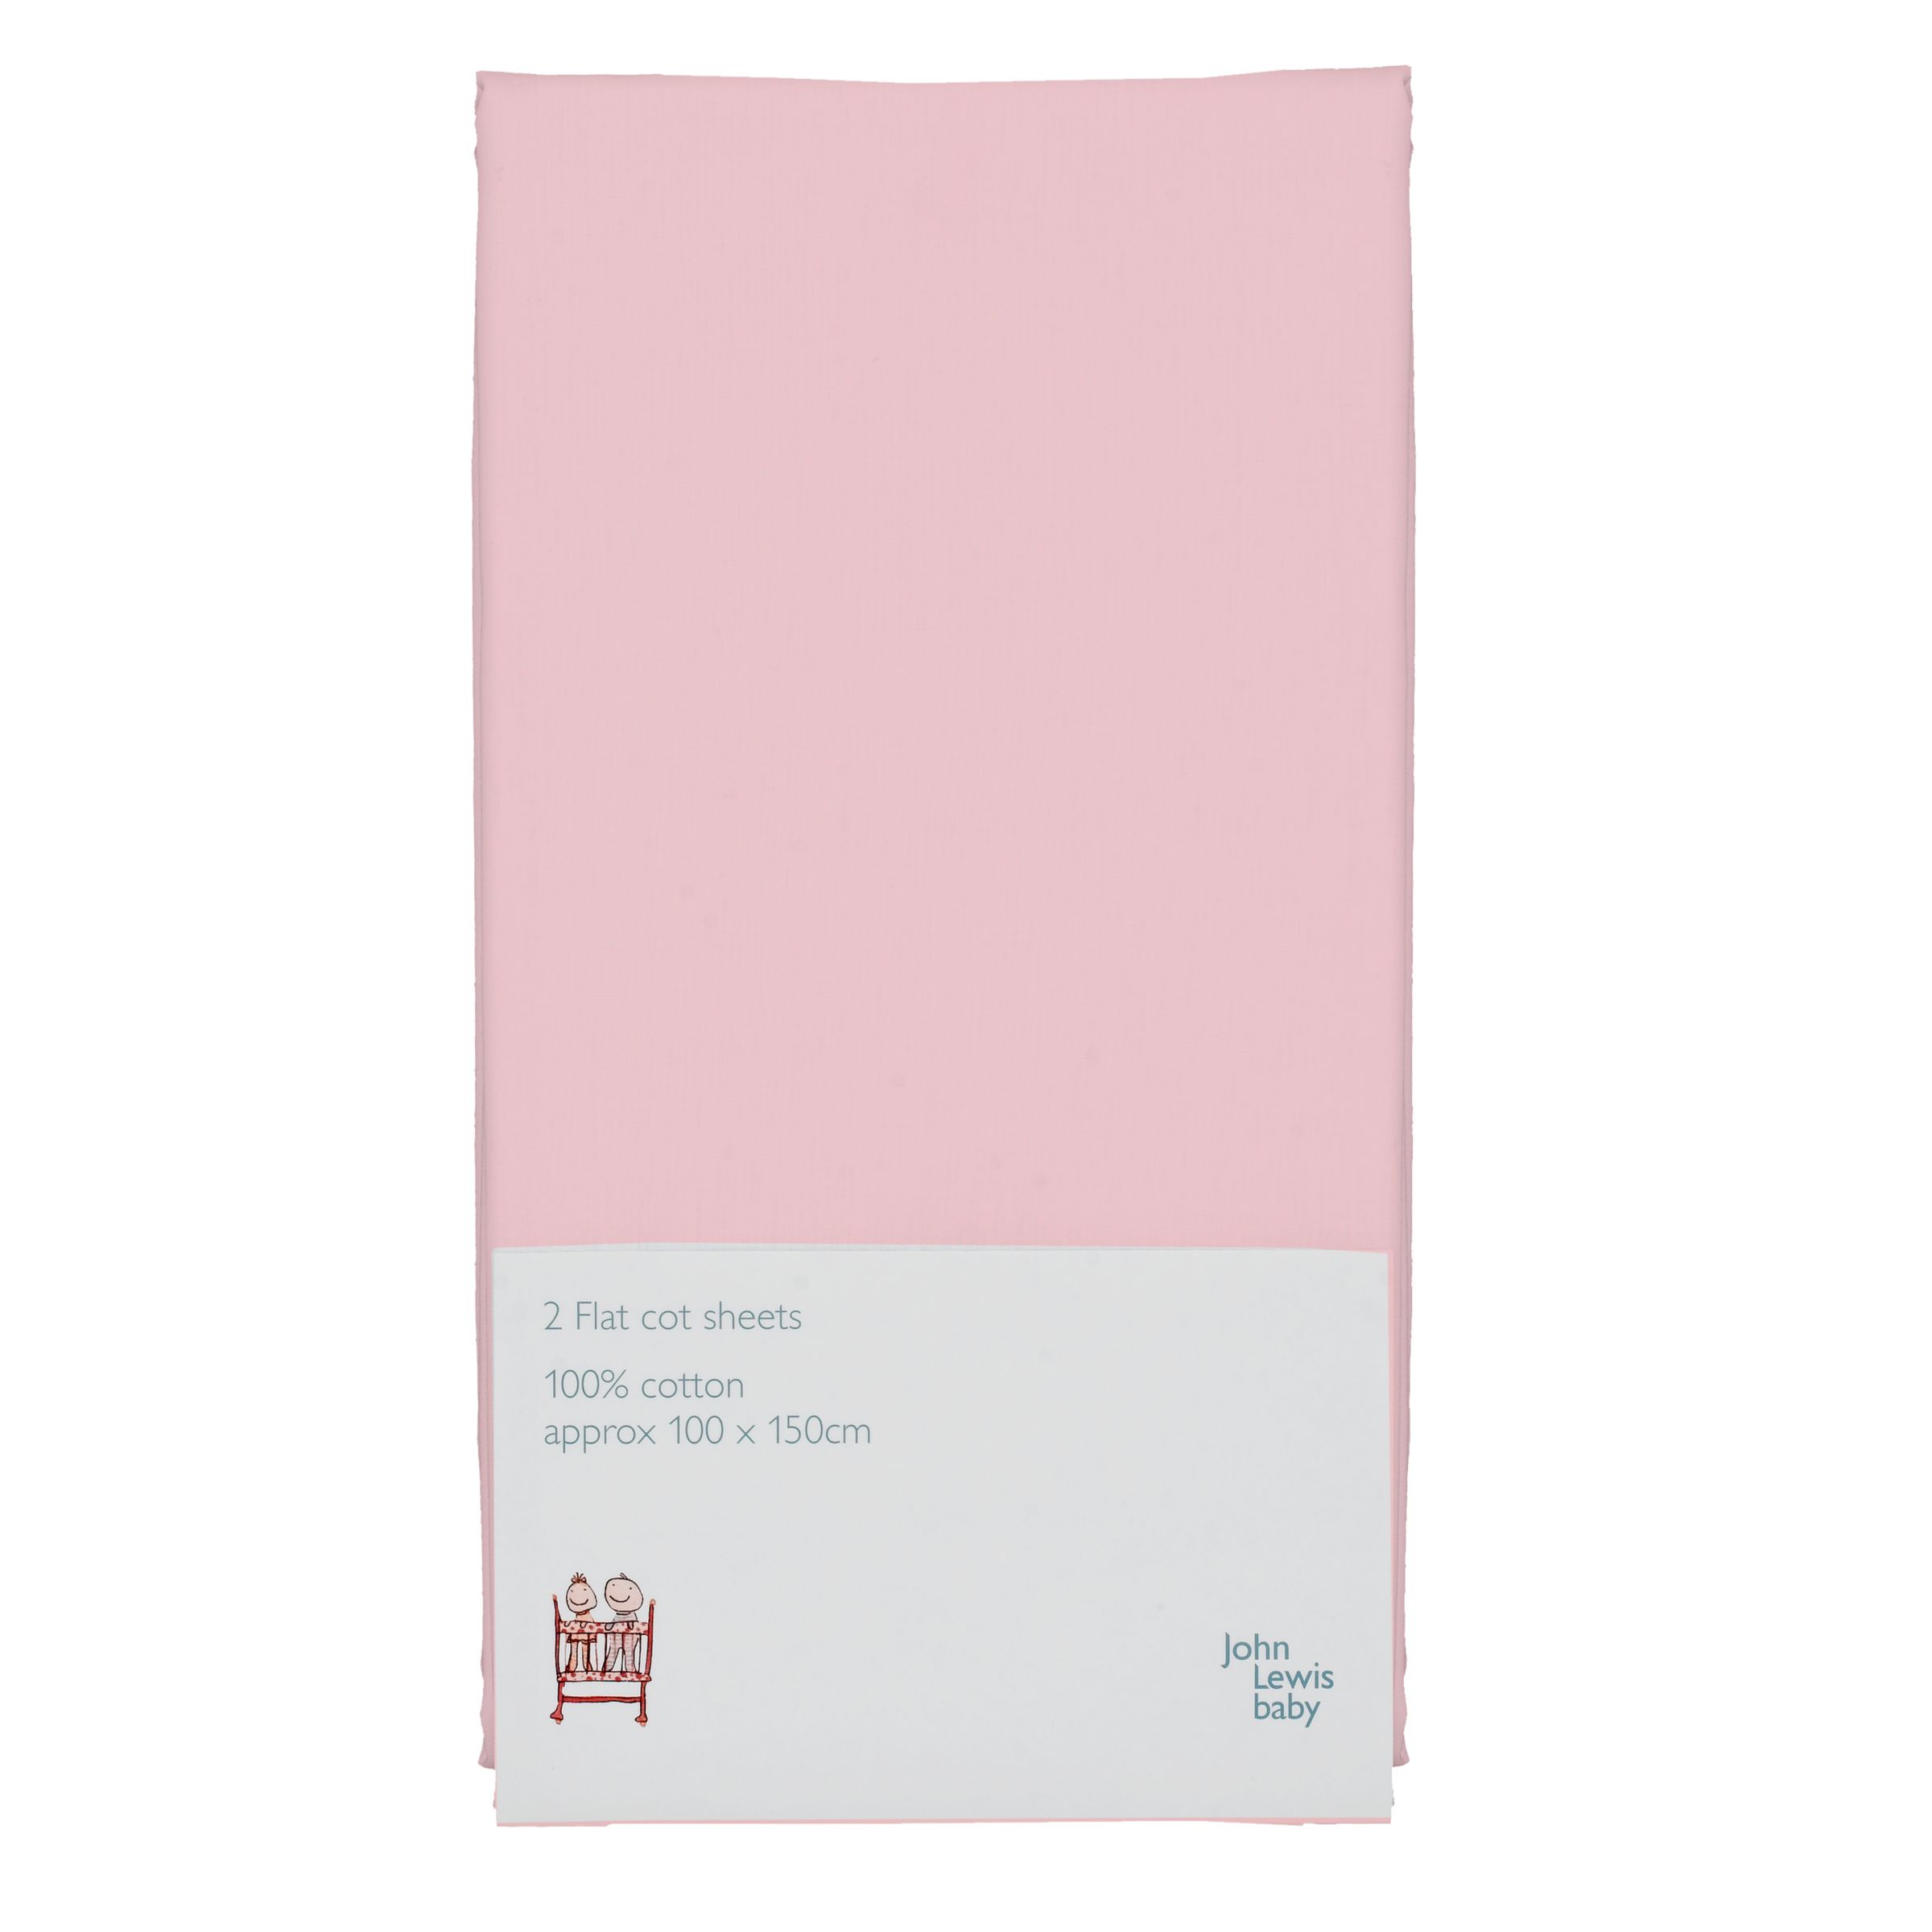 Flat Cot Sheet, Pack of 2, Pink